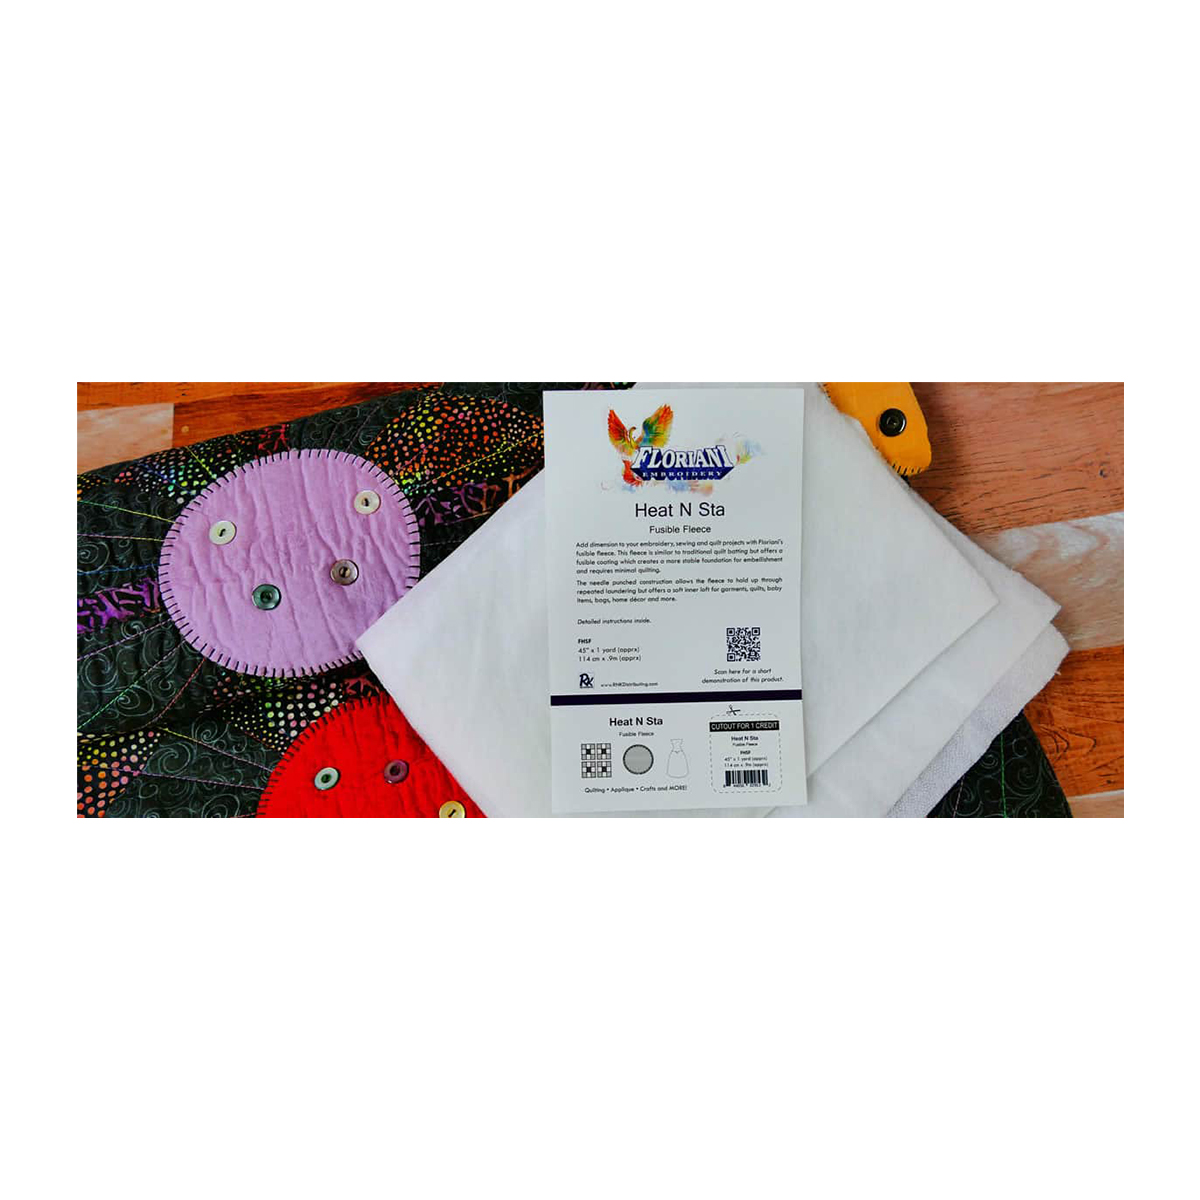 Fusible Fleece Quilt Batting products for sale